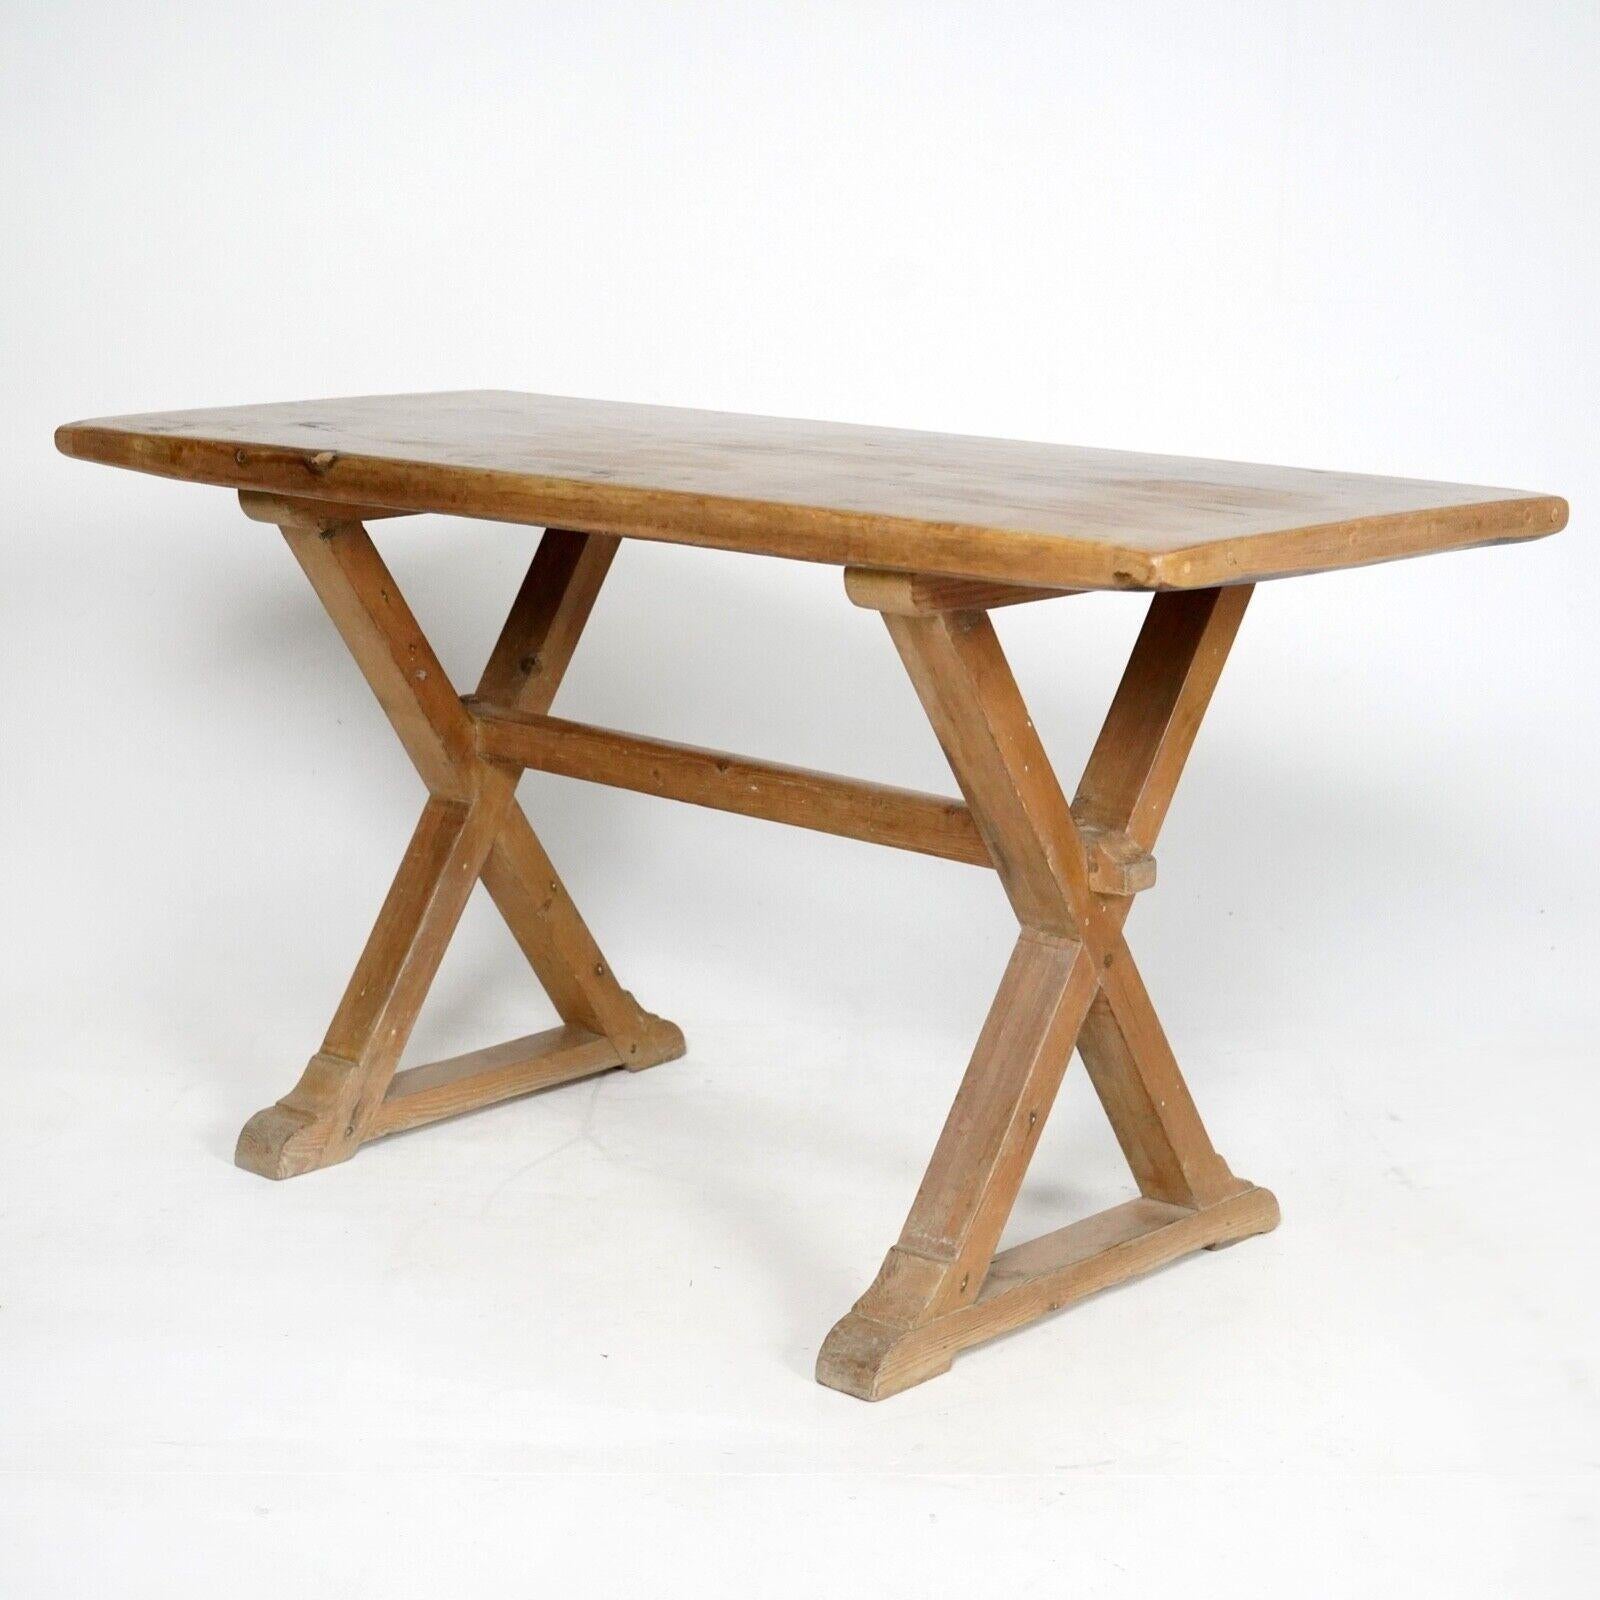 19th Century Pine Slab Top Tavern Table Dining Table In Good Condition For Sale In Dorchester, GB